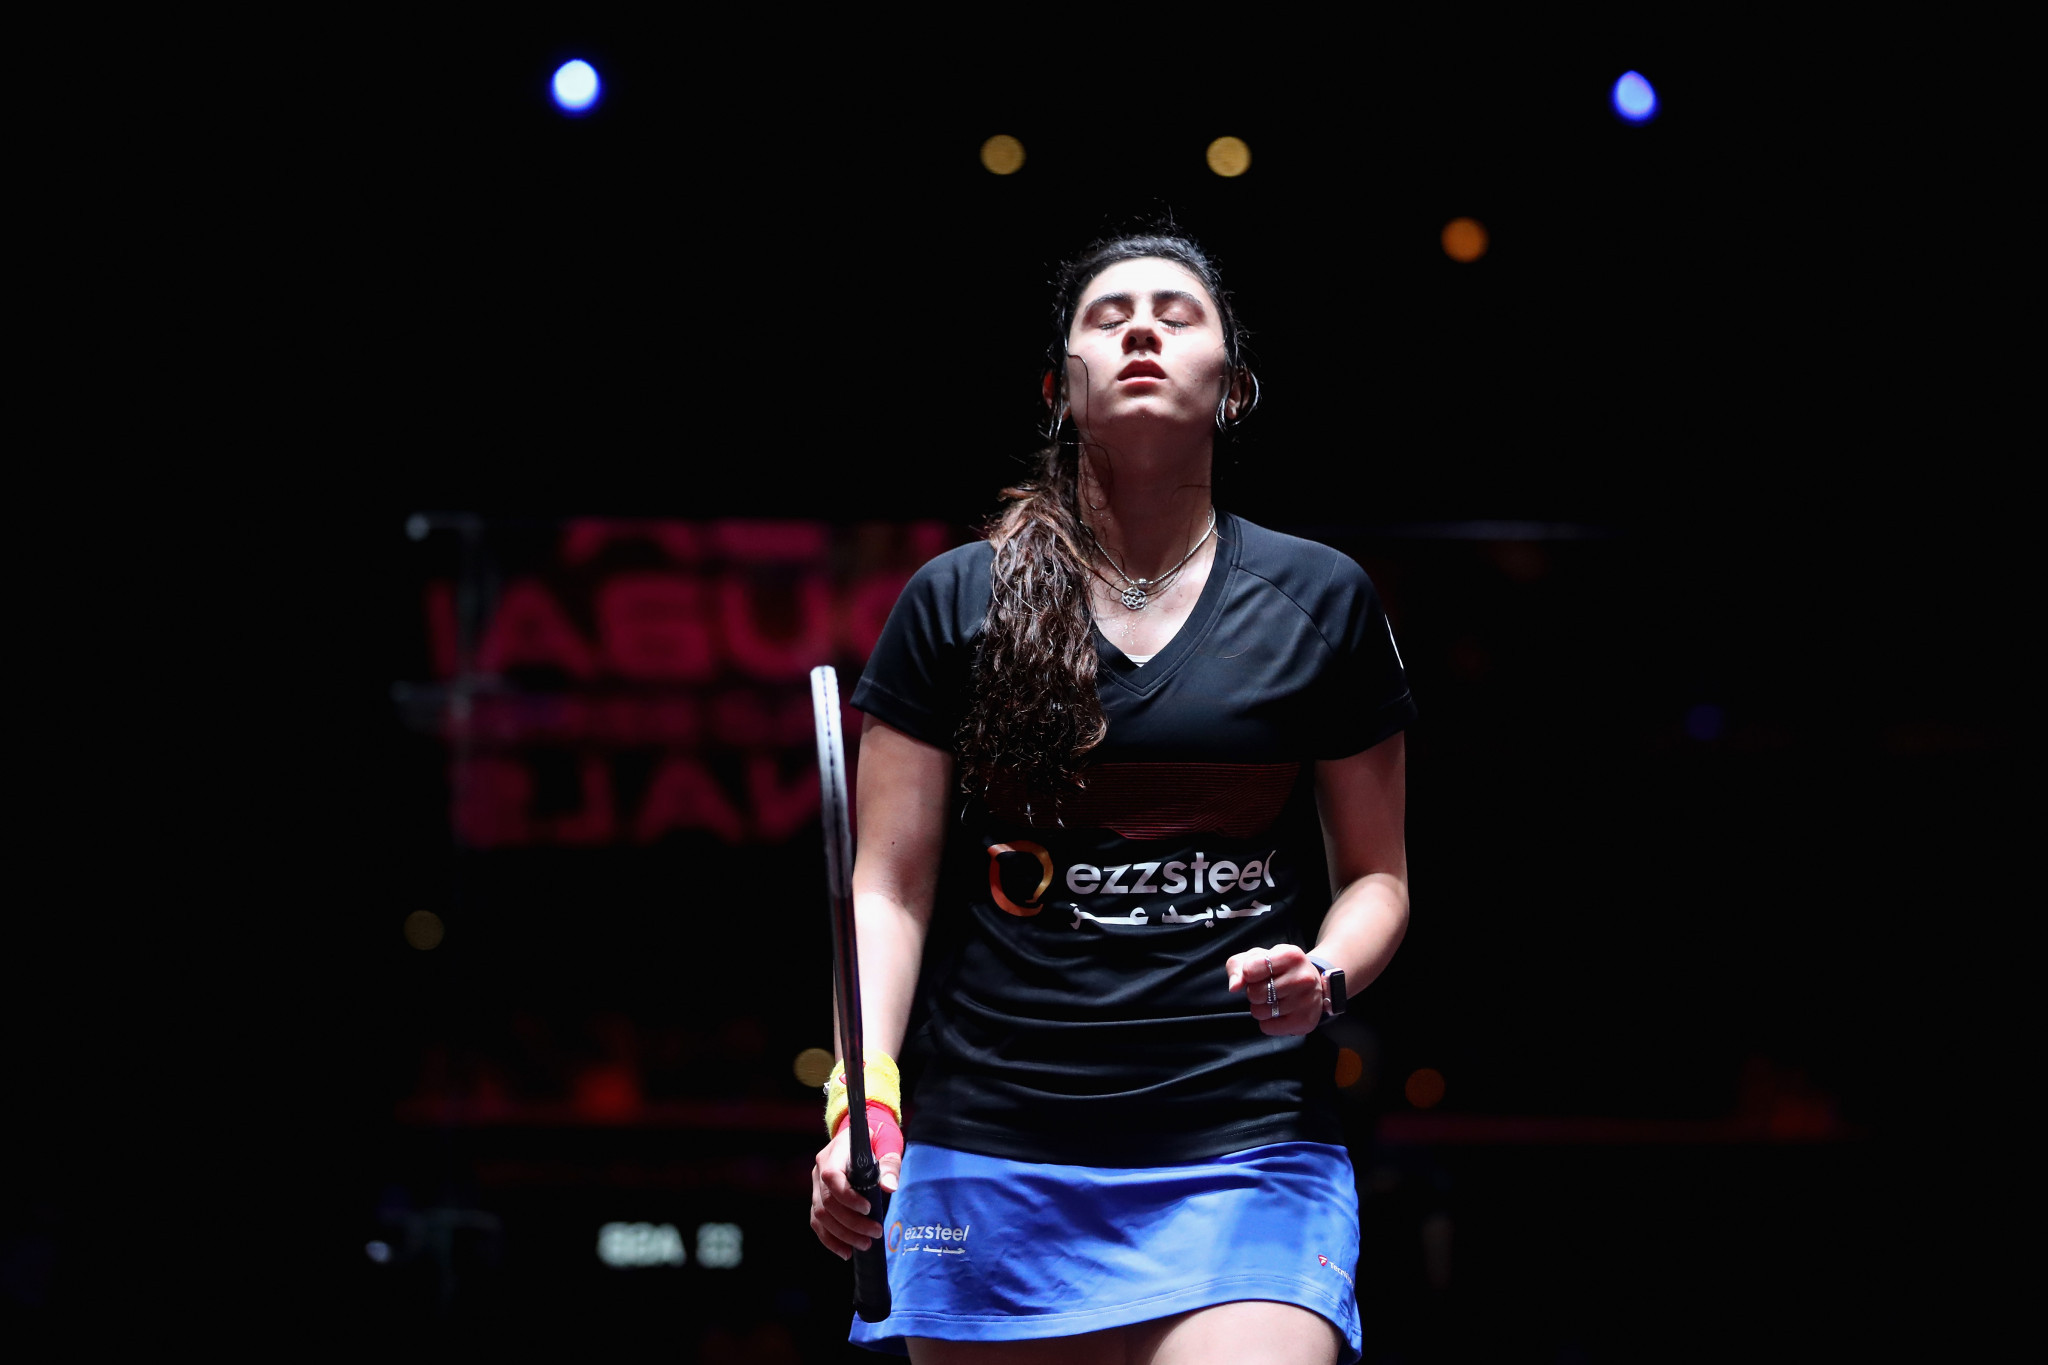 Women's top seed Nour El Sherbini was defeated in her opening match at the PSA World Tour Finals ©Getty Images